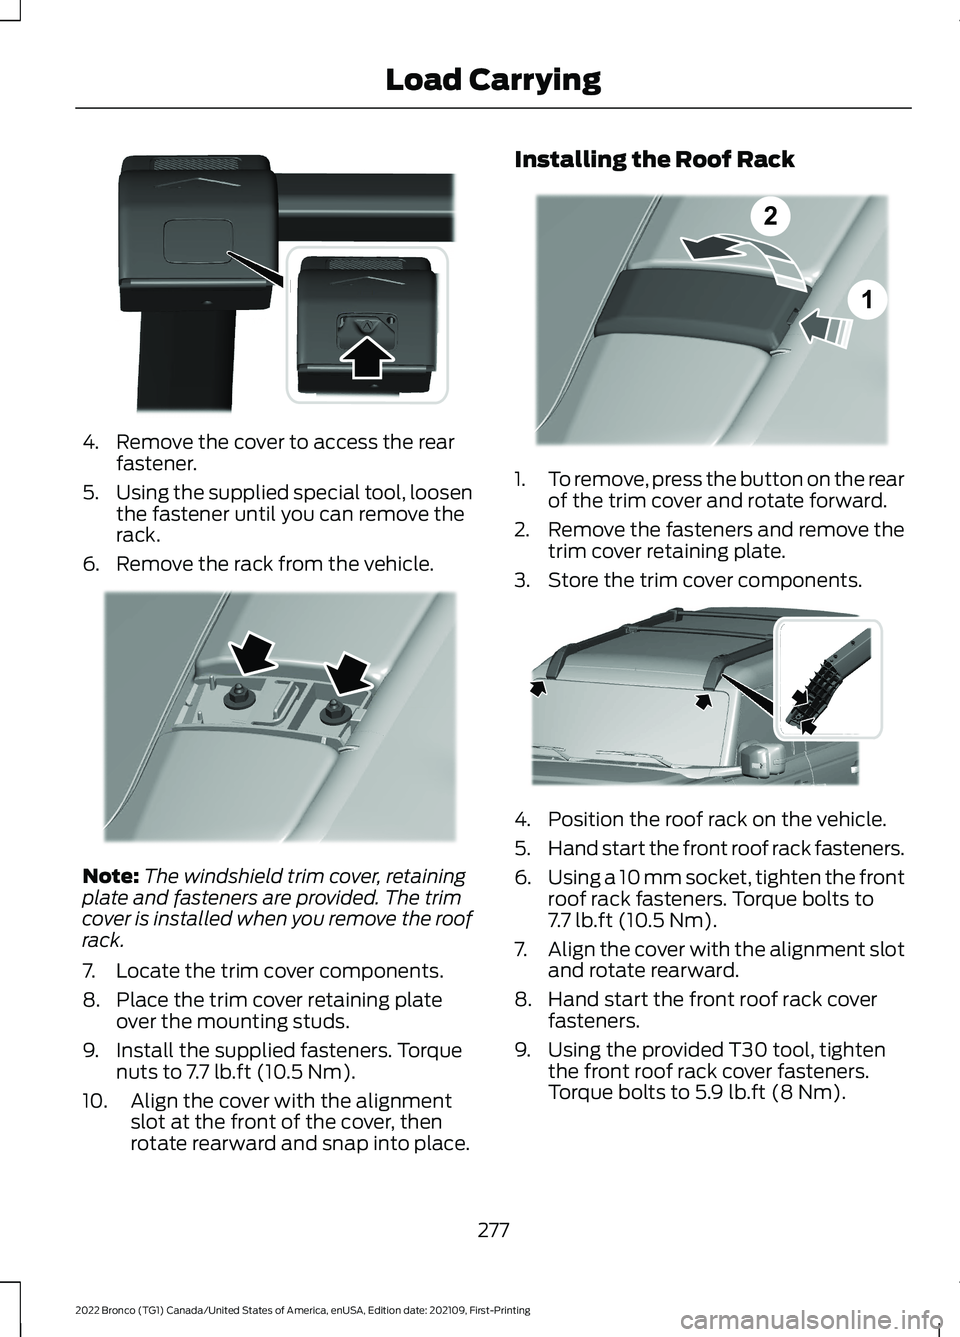 FORD BRONCO 2022  Owners Manual 4.Remove the cover to access the rearfastener.
5.Using the supplied special tool, loosenthe fastener until you can remove therack.
6.Remove the rack from the vehicle.
Note:The windshield trim cover, r